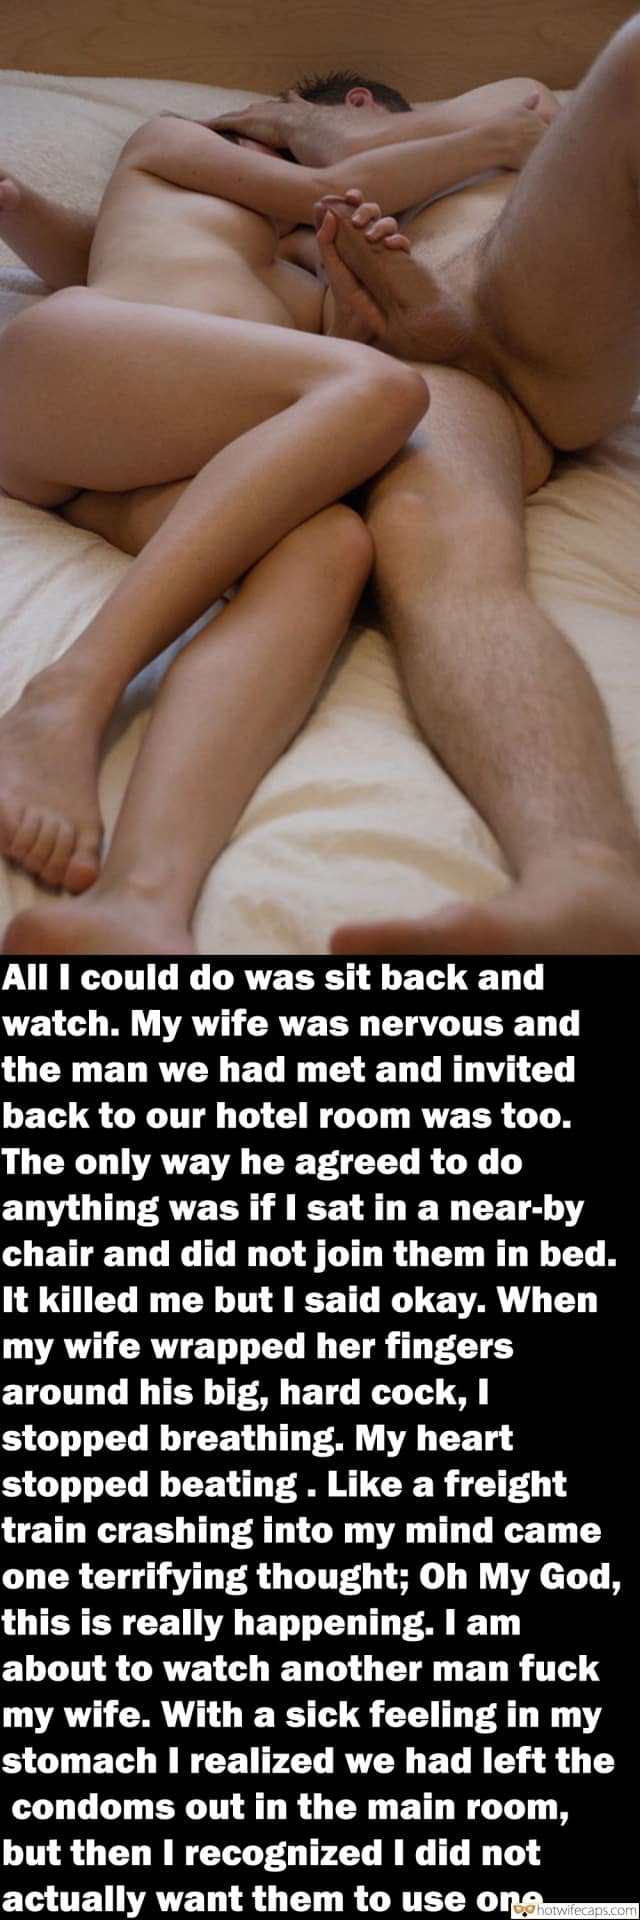 Cuckold Stories hotwife caption: All I could do was sit back and watch. My wife was nervous and the man we had met and invited back to our hotel room was too. The only way he agreed to do anything was if I sat...